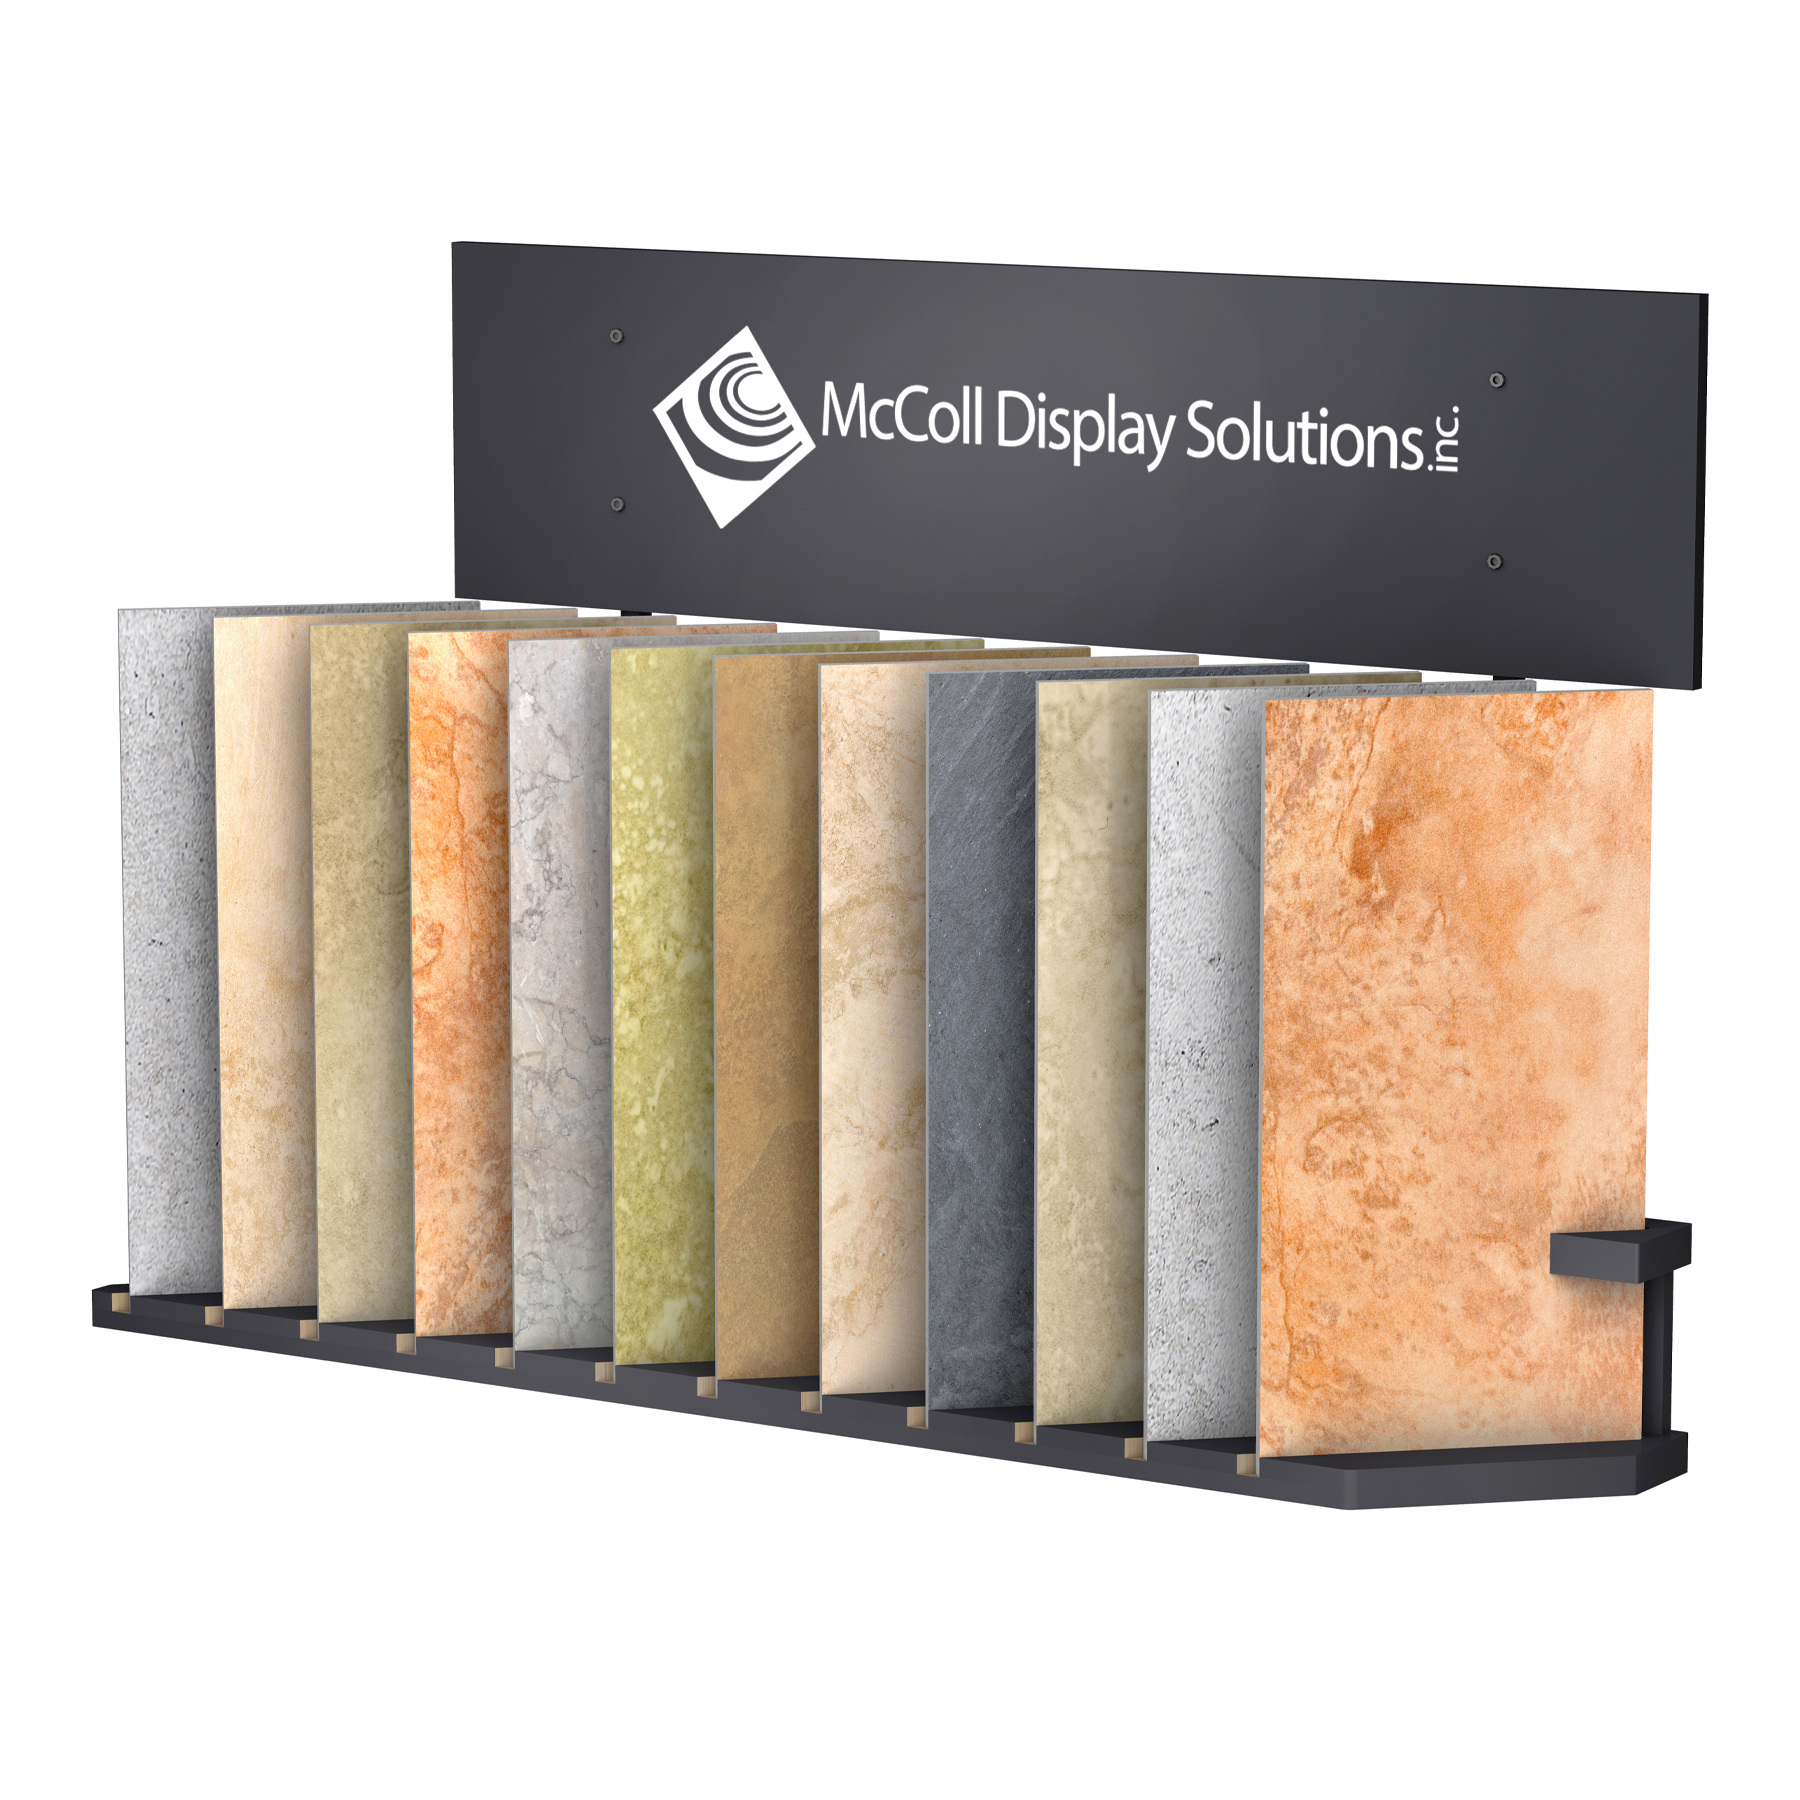 CD100 Floor Stand Display Has Slots for Ceramic Tiles Marble Stone Quartz Travertine Flooring Samples Great Visibility